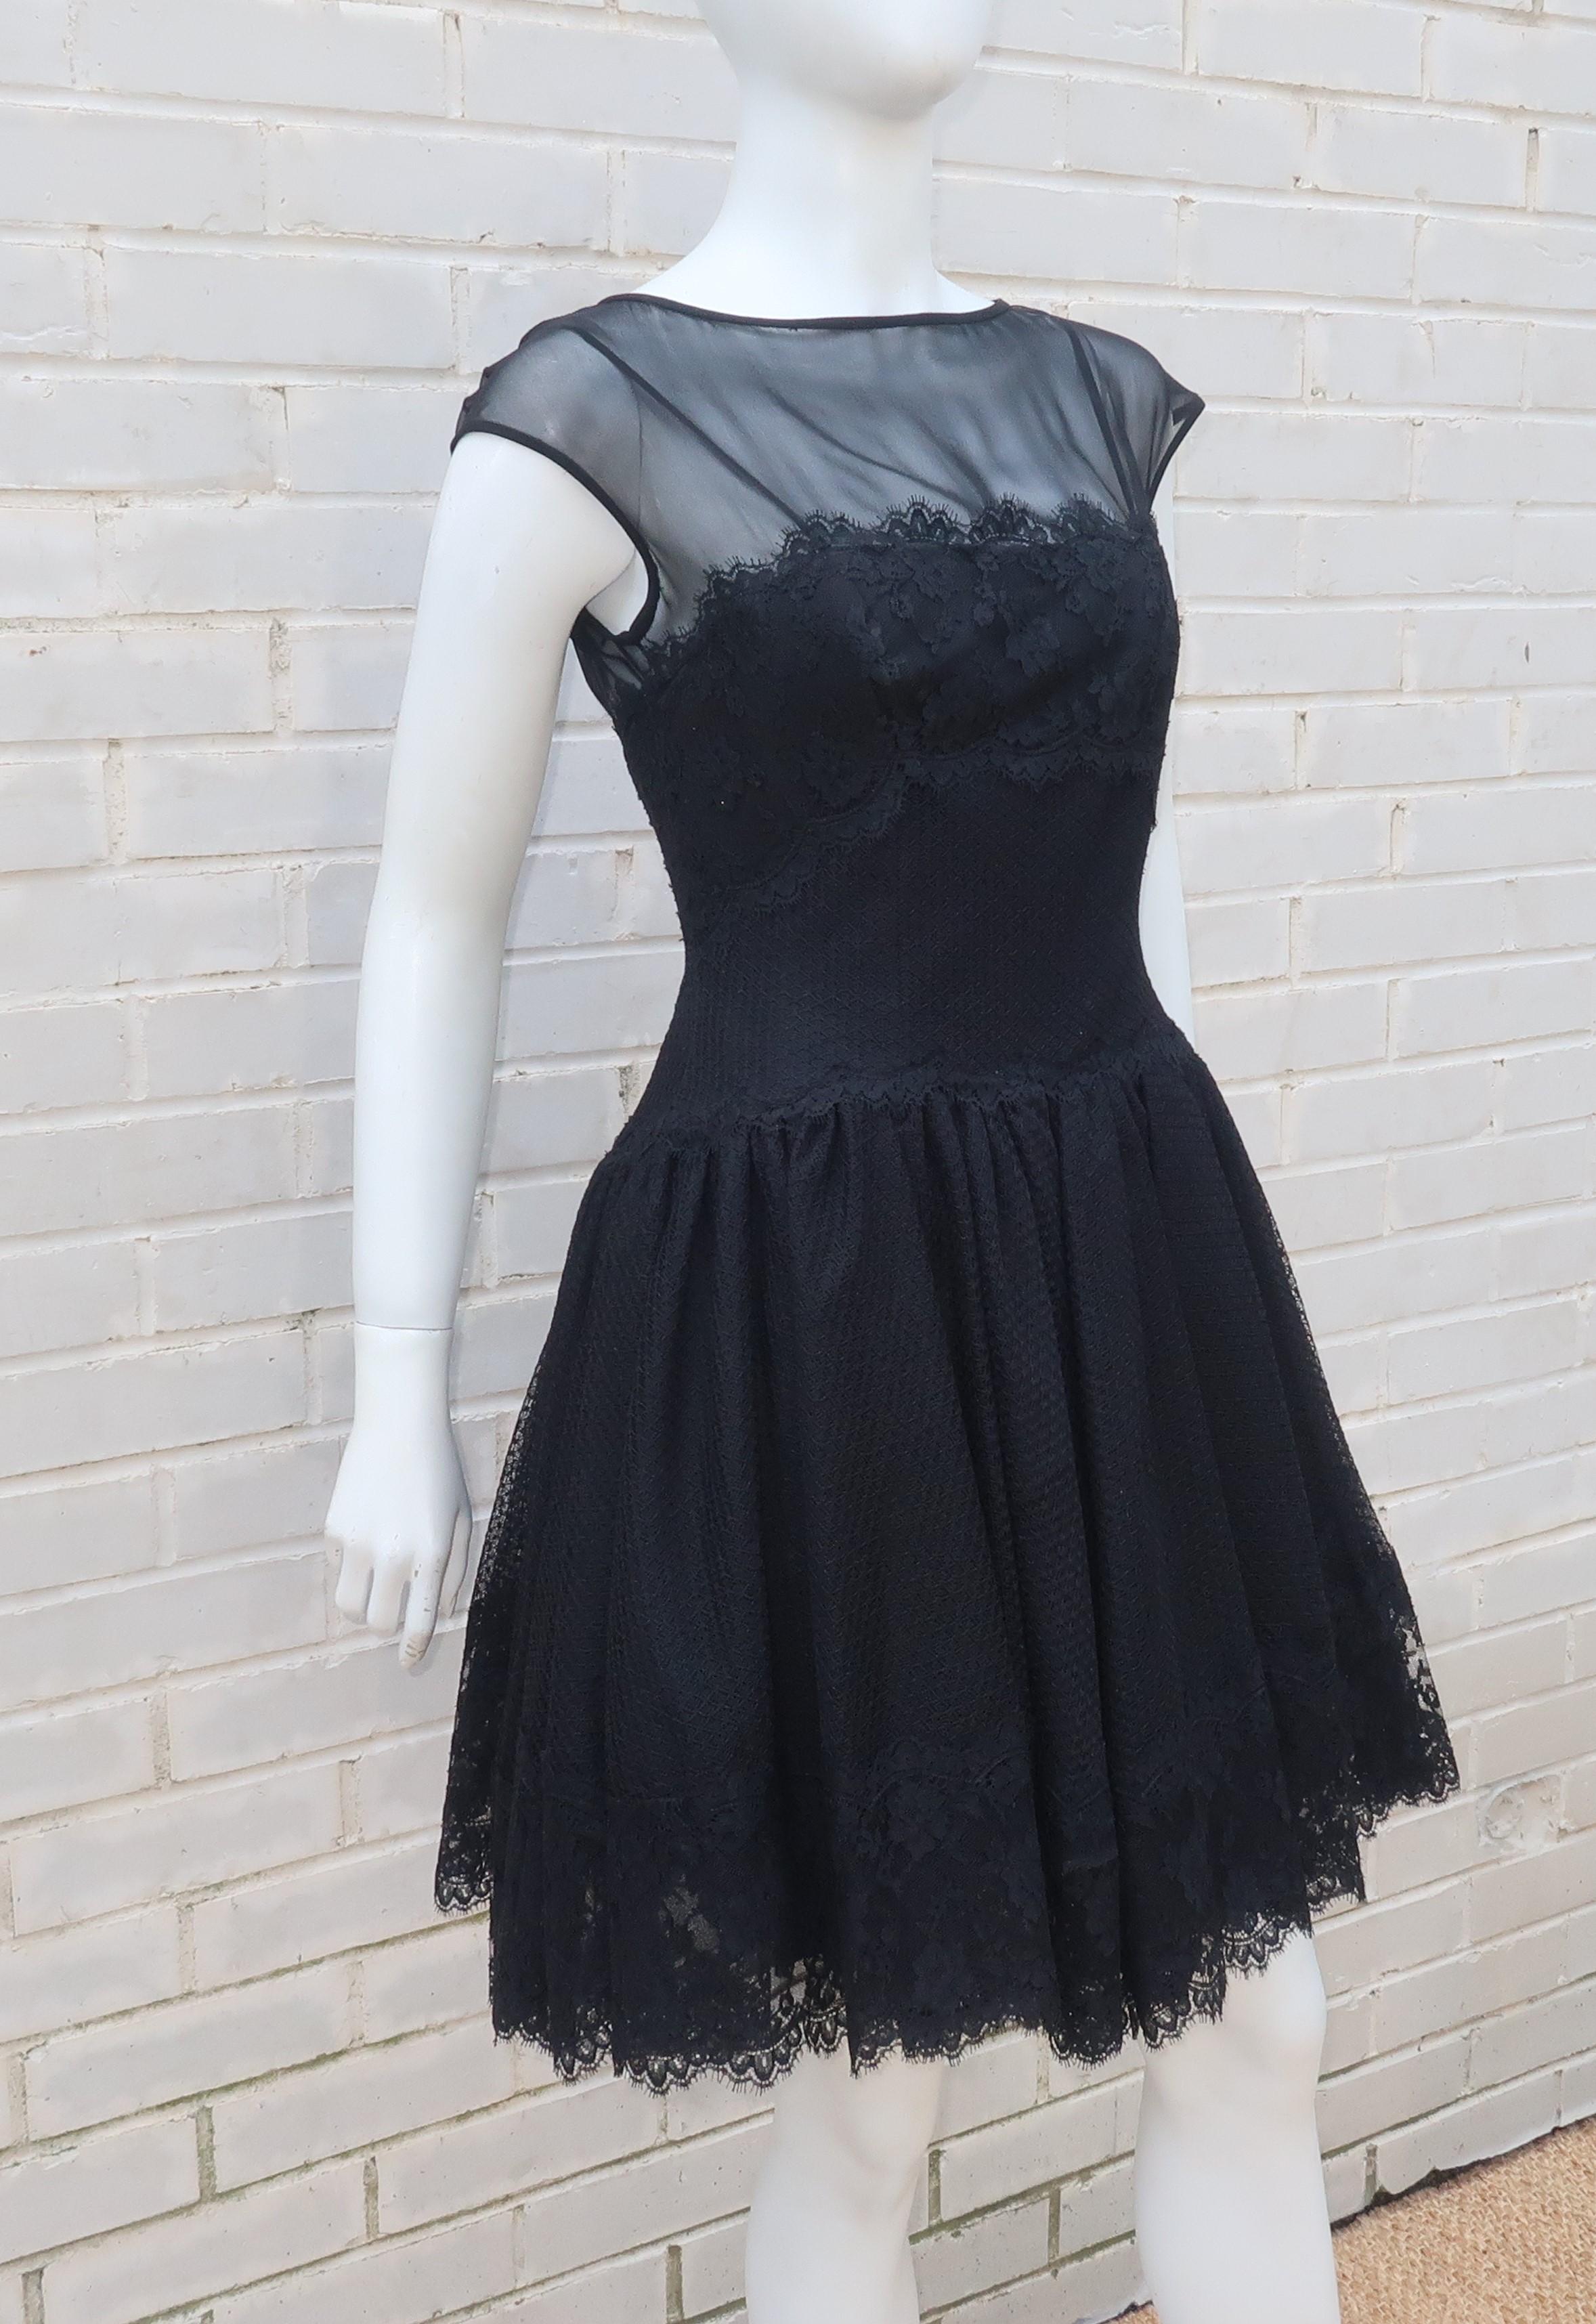 Stanley Platos Black Tulle and Lace Ballerina Cocktail Dress, 1980s   1